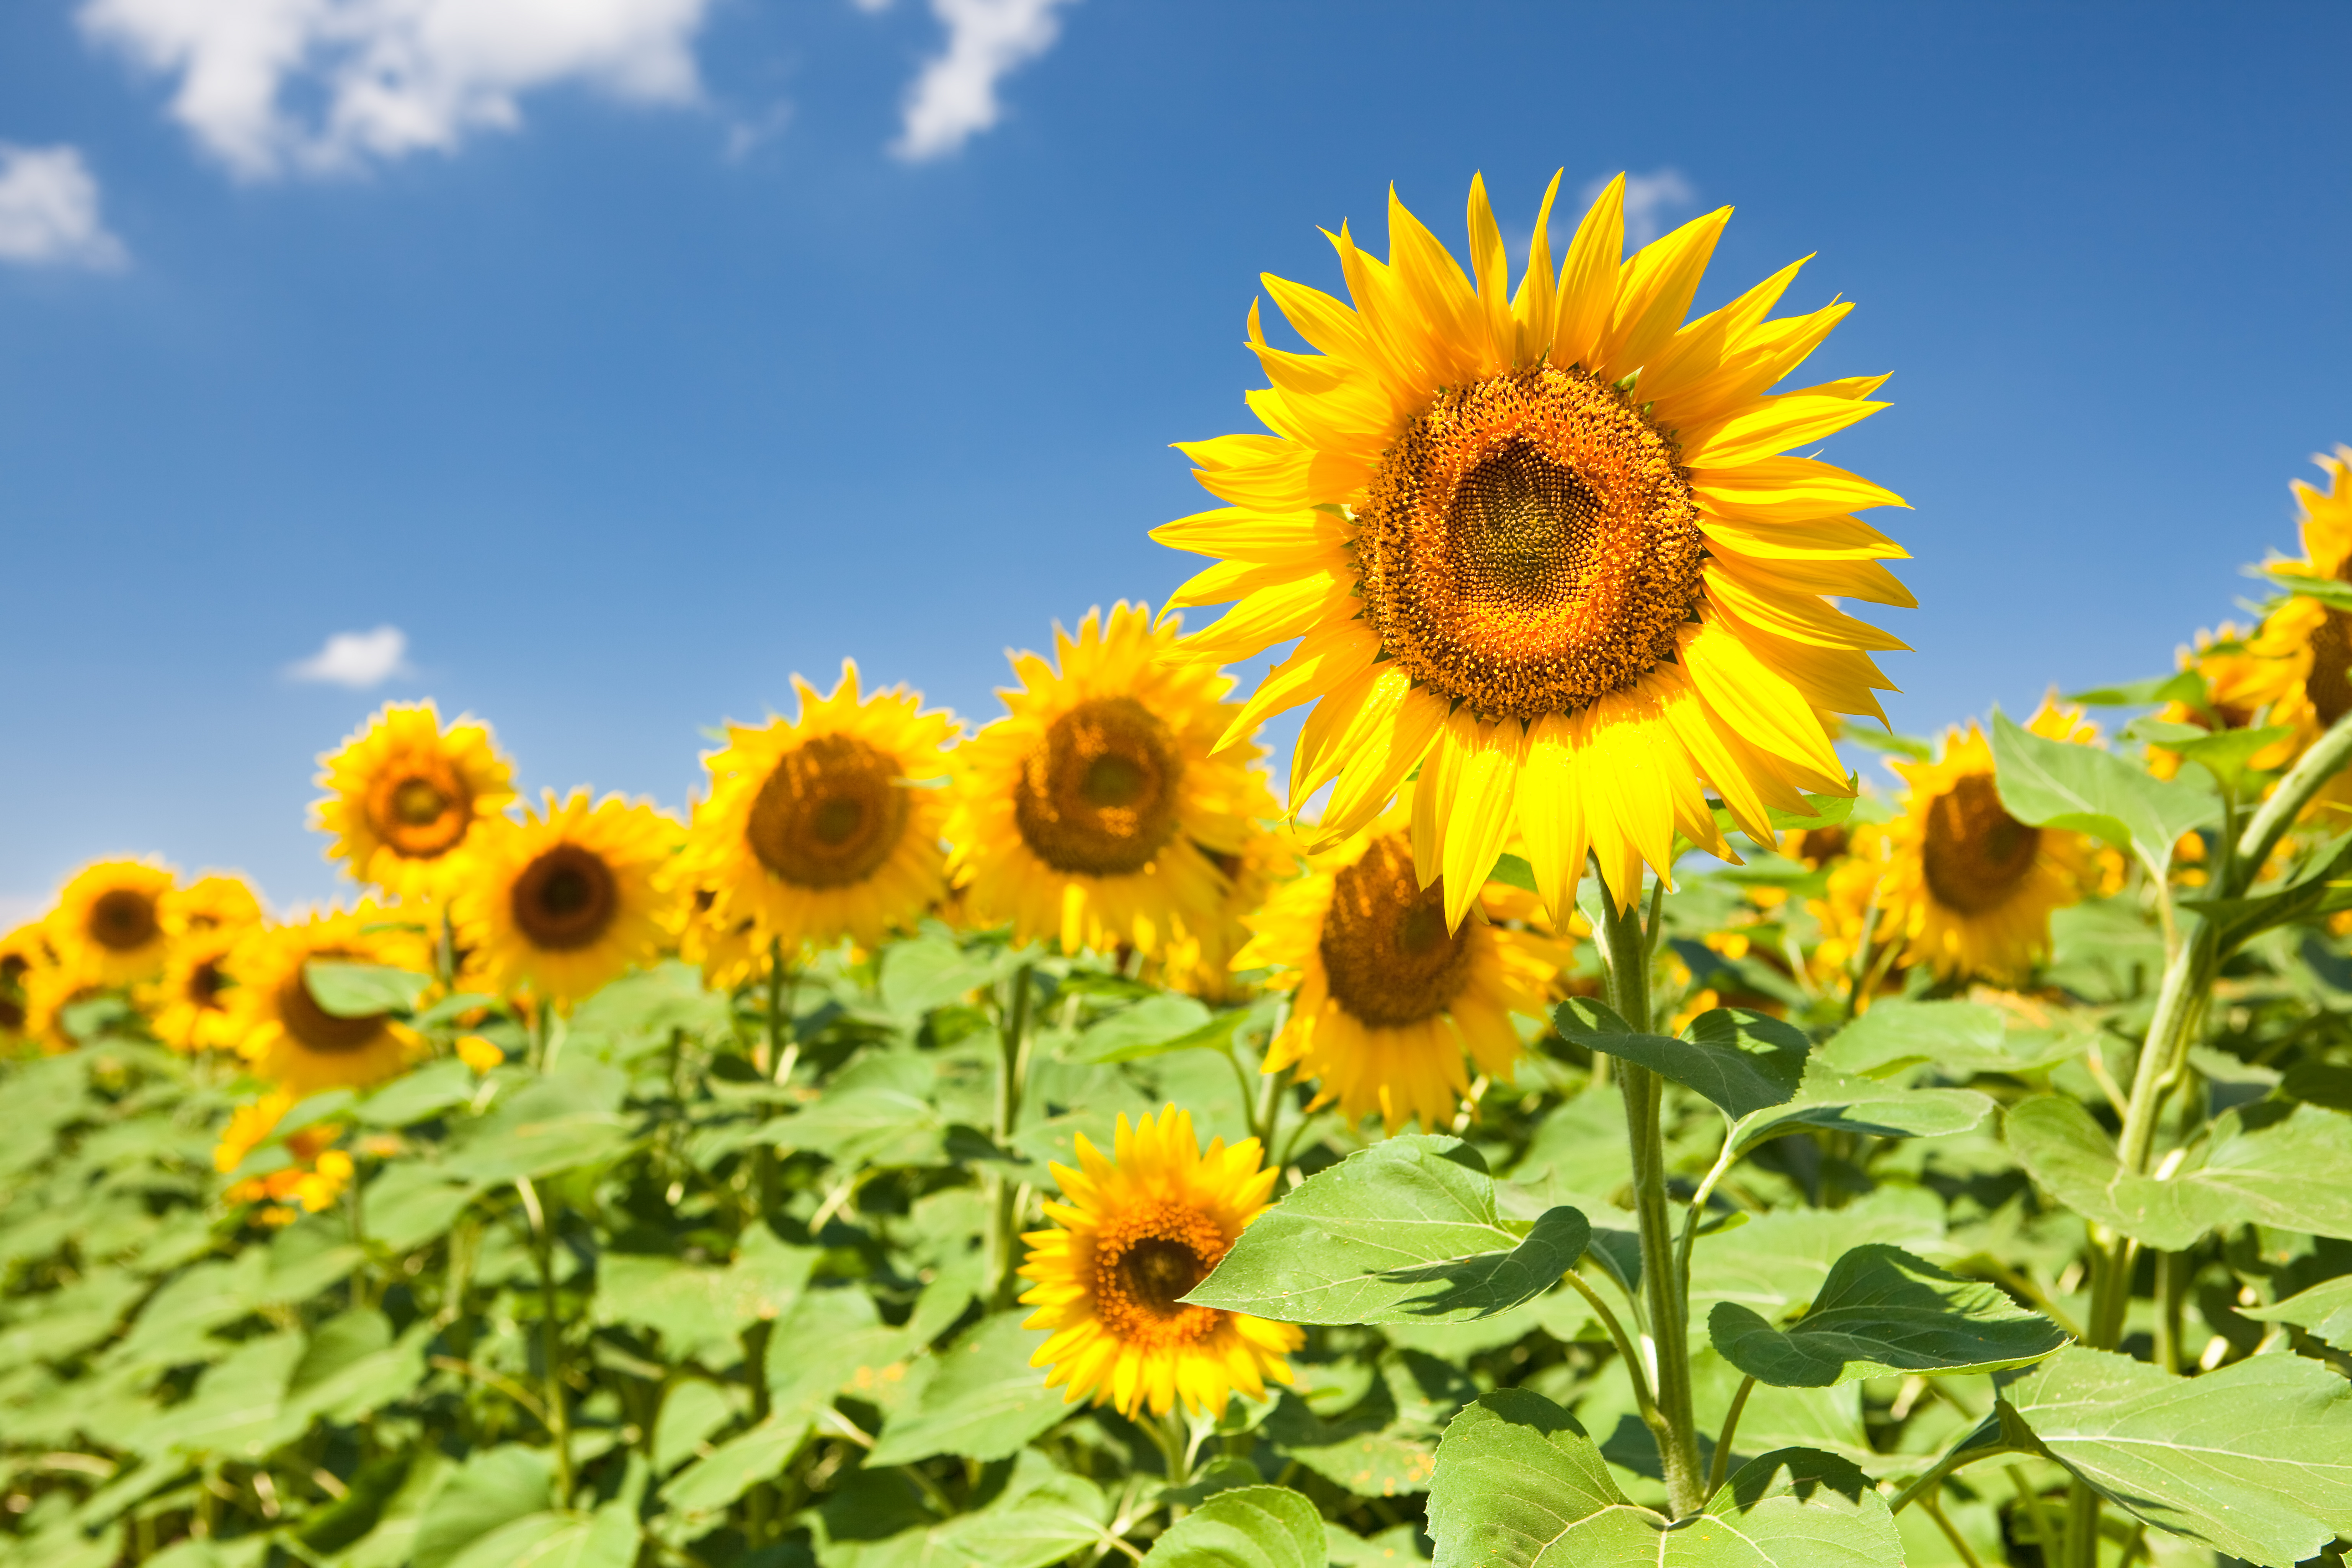 Sunflowers in the field photo